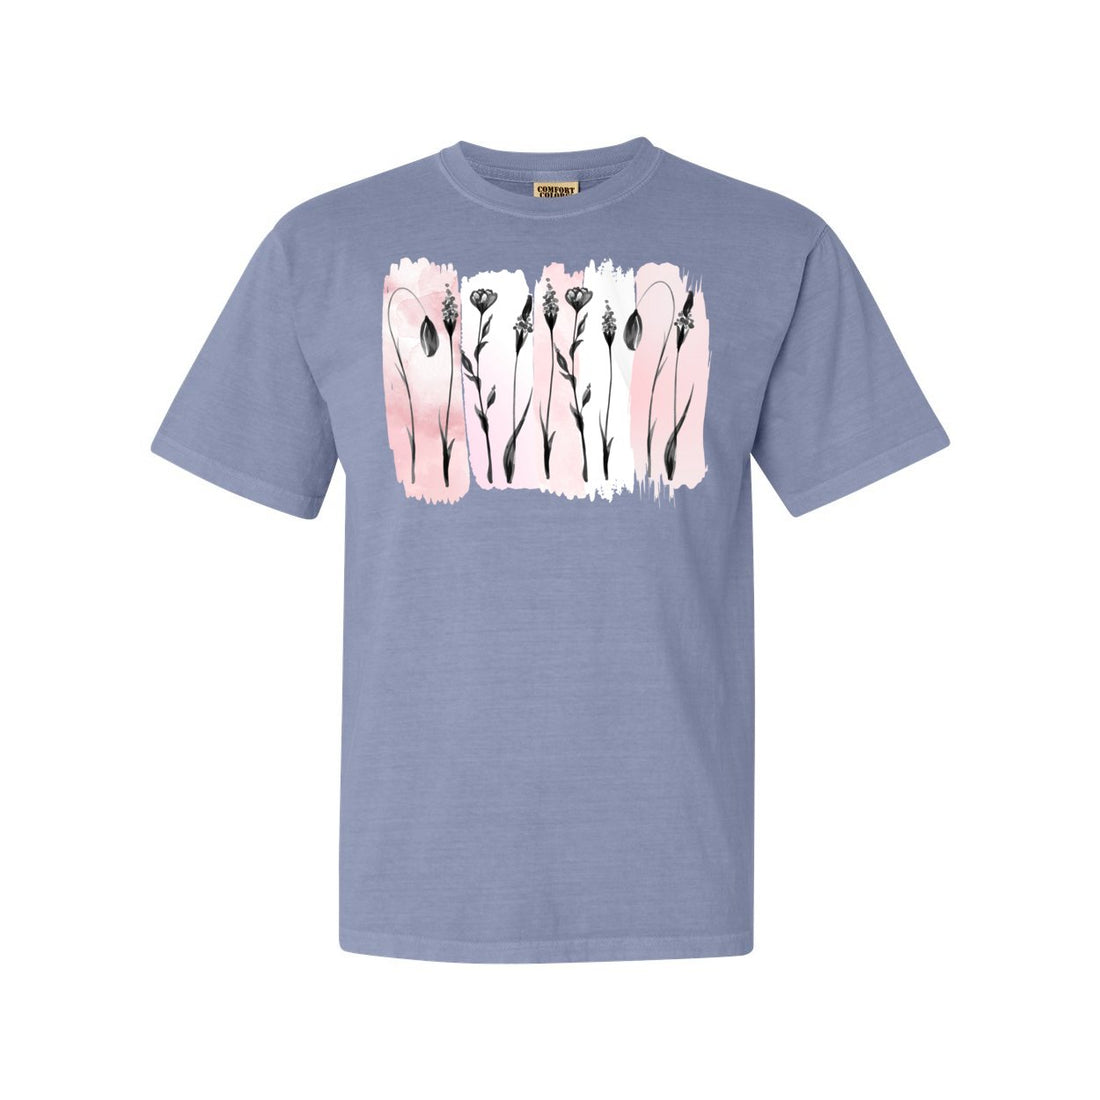 Dainty Flowers Comfort Colors Tee - T-Shirts - Positively Sassy - Dainty Flowers Comfort Colors Tee